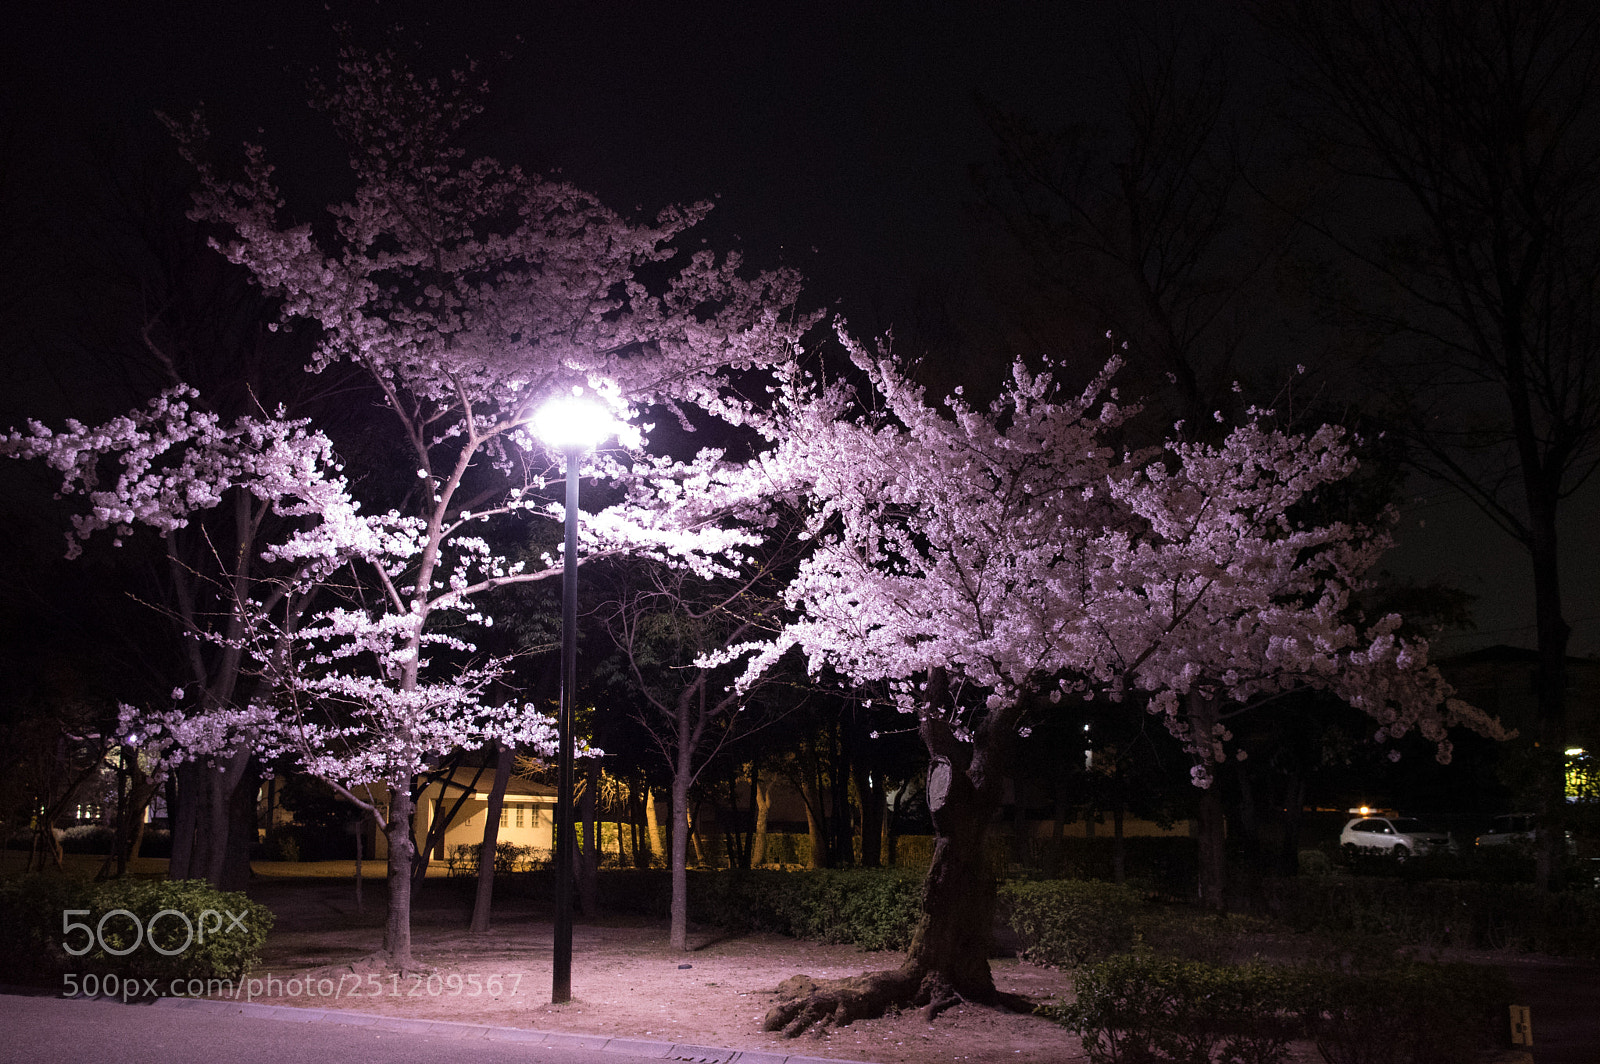 Pentax KP sample photo. Night cold blossom photography